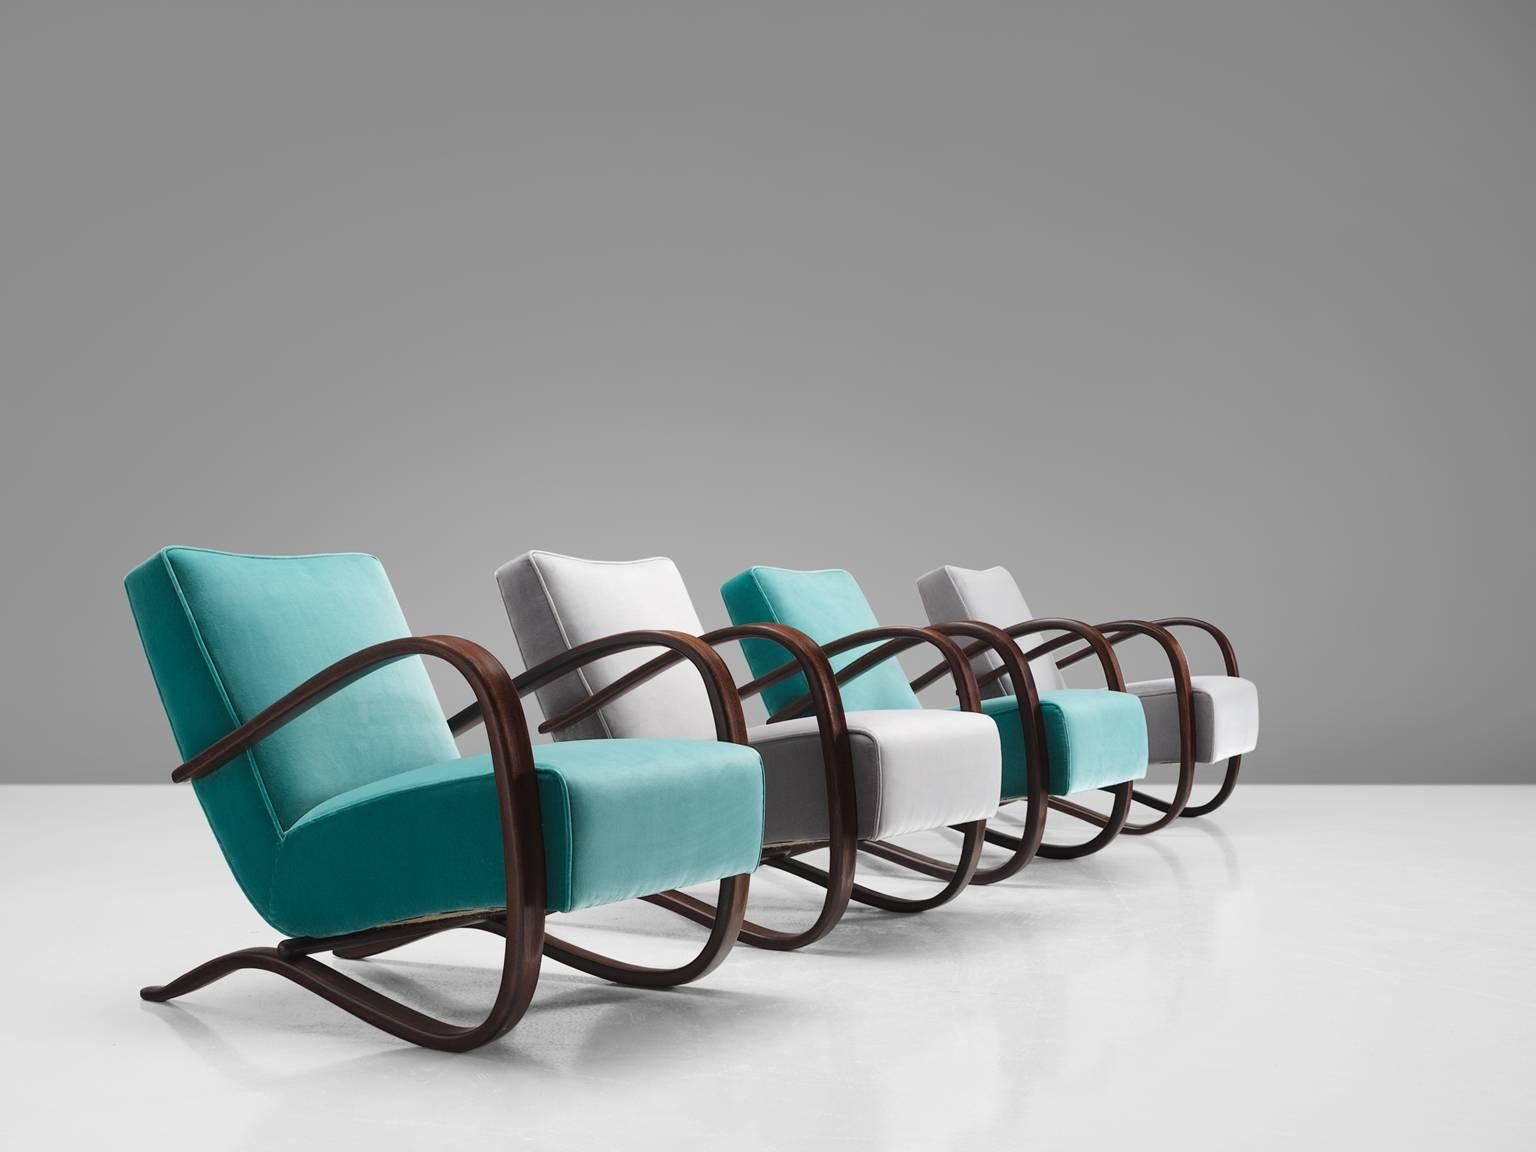 Mid-20th Century Jindrich Halabala Lounge Chairs in Reupholstered in Turquoise Velvet